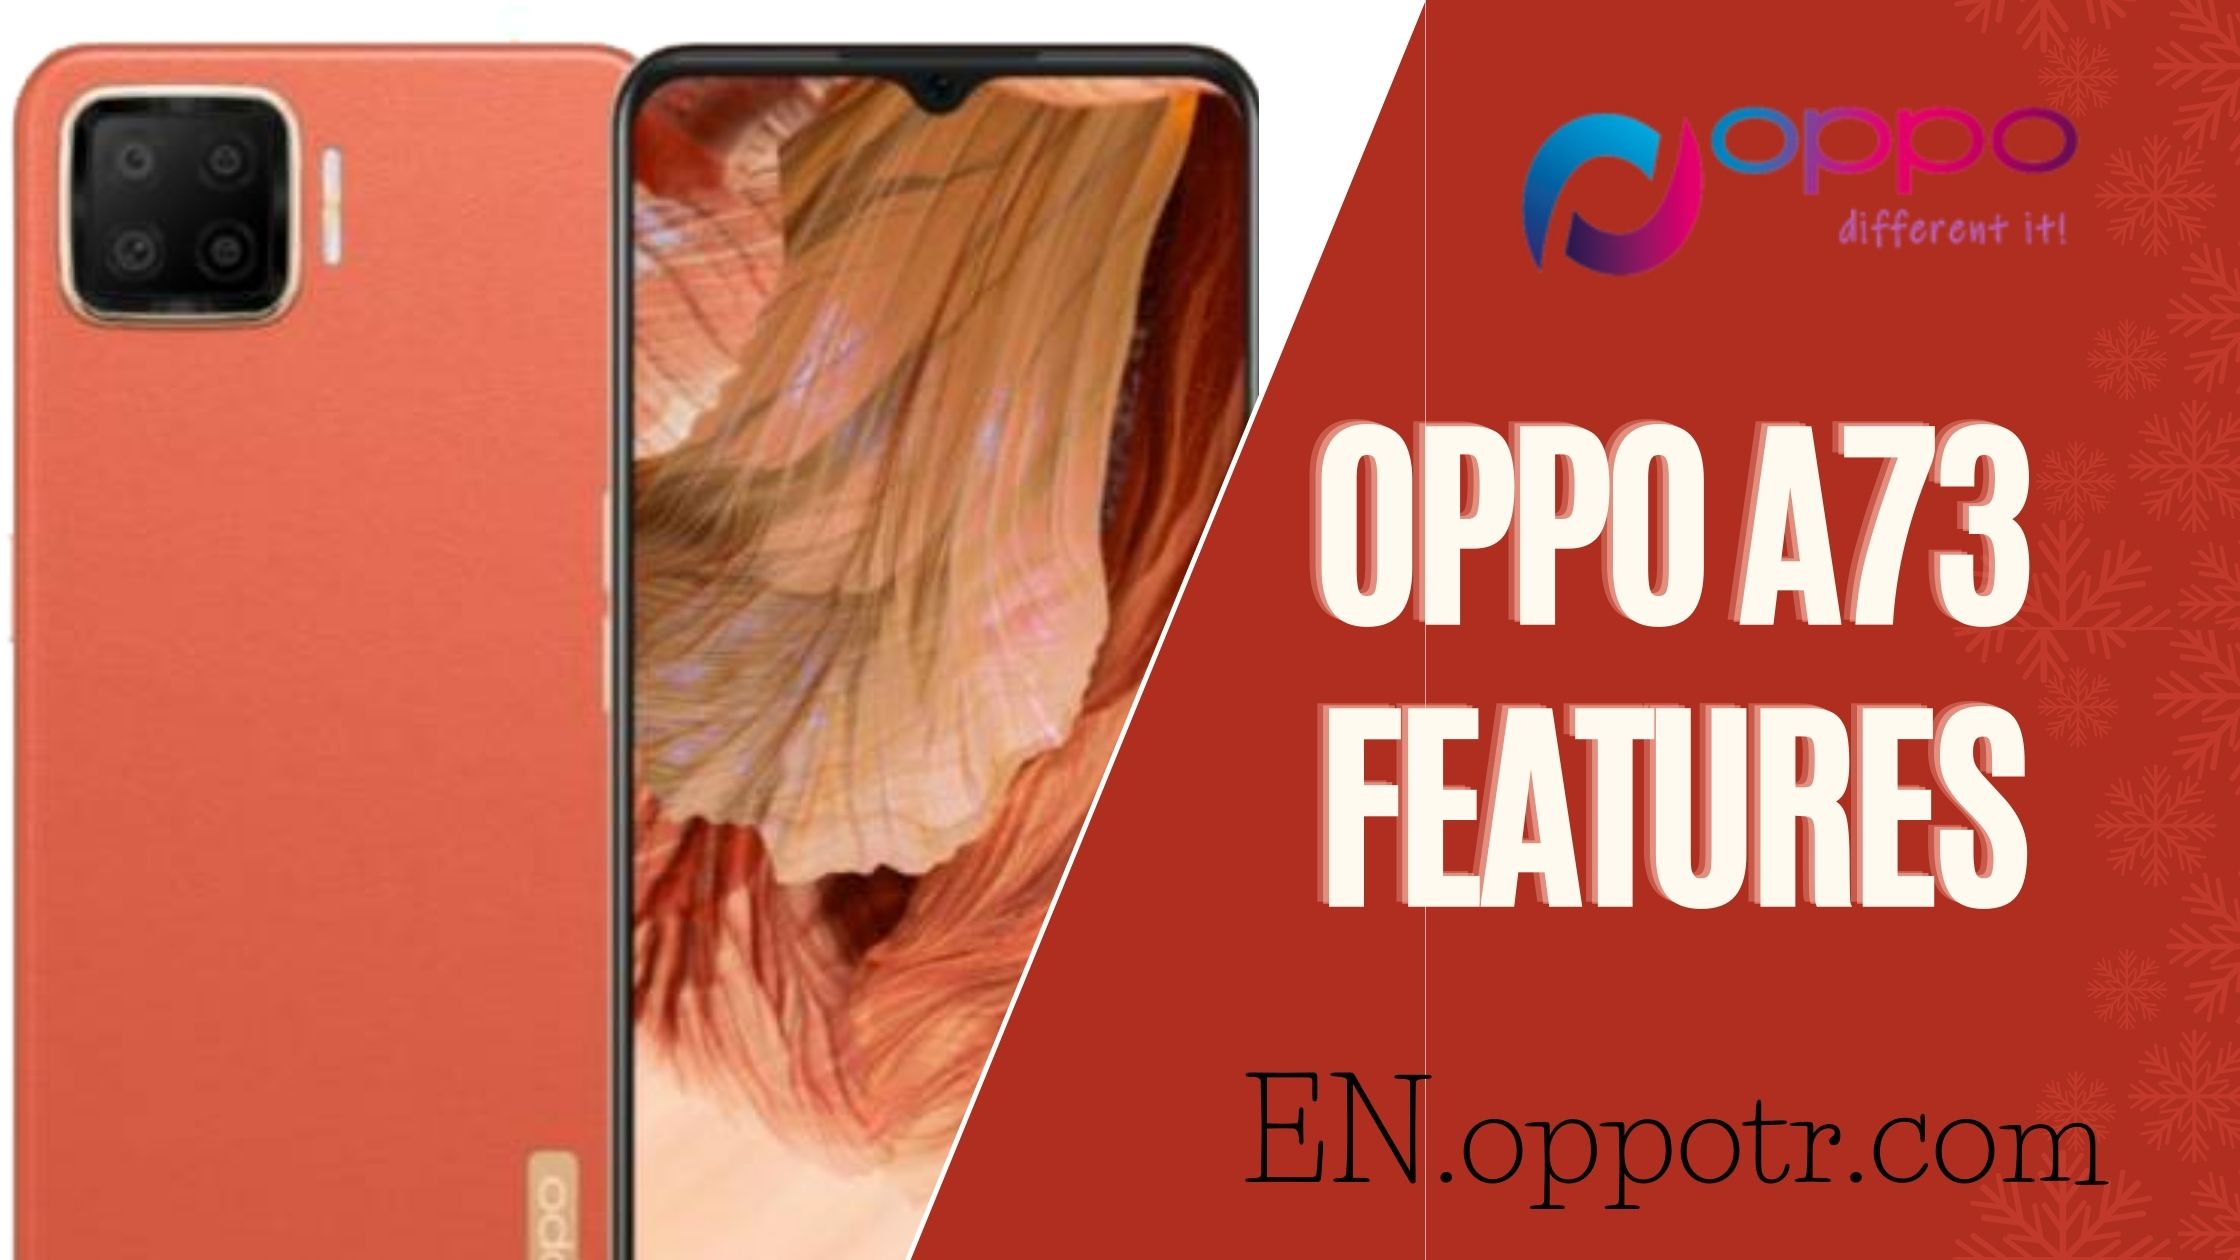 Oppo A73 Features: Is It Worth the Hype?